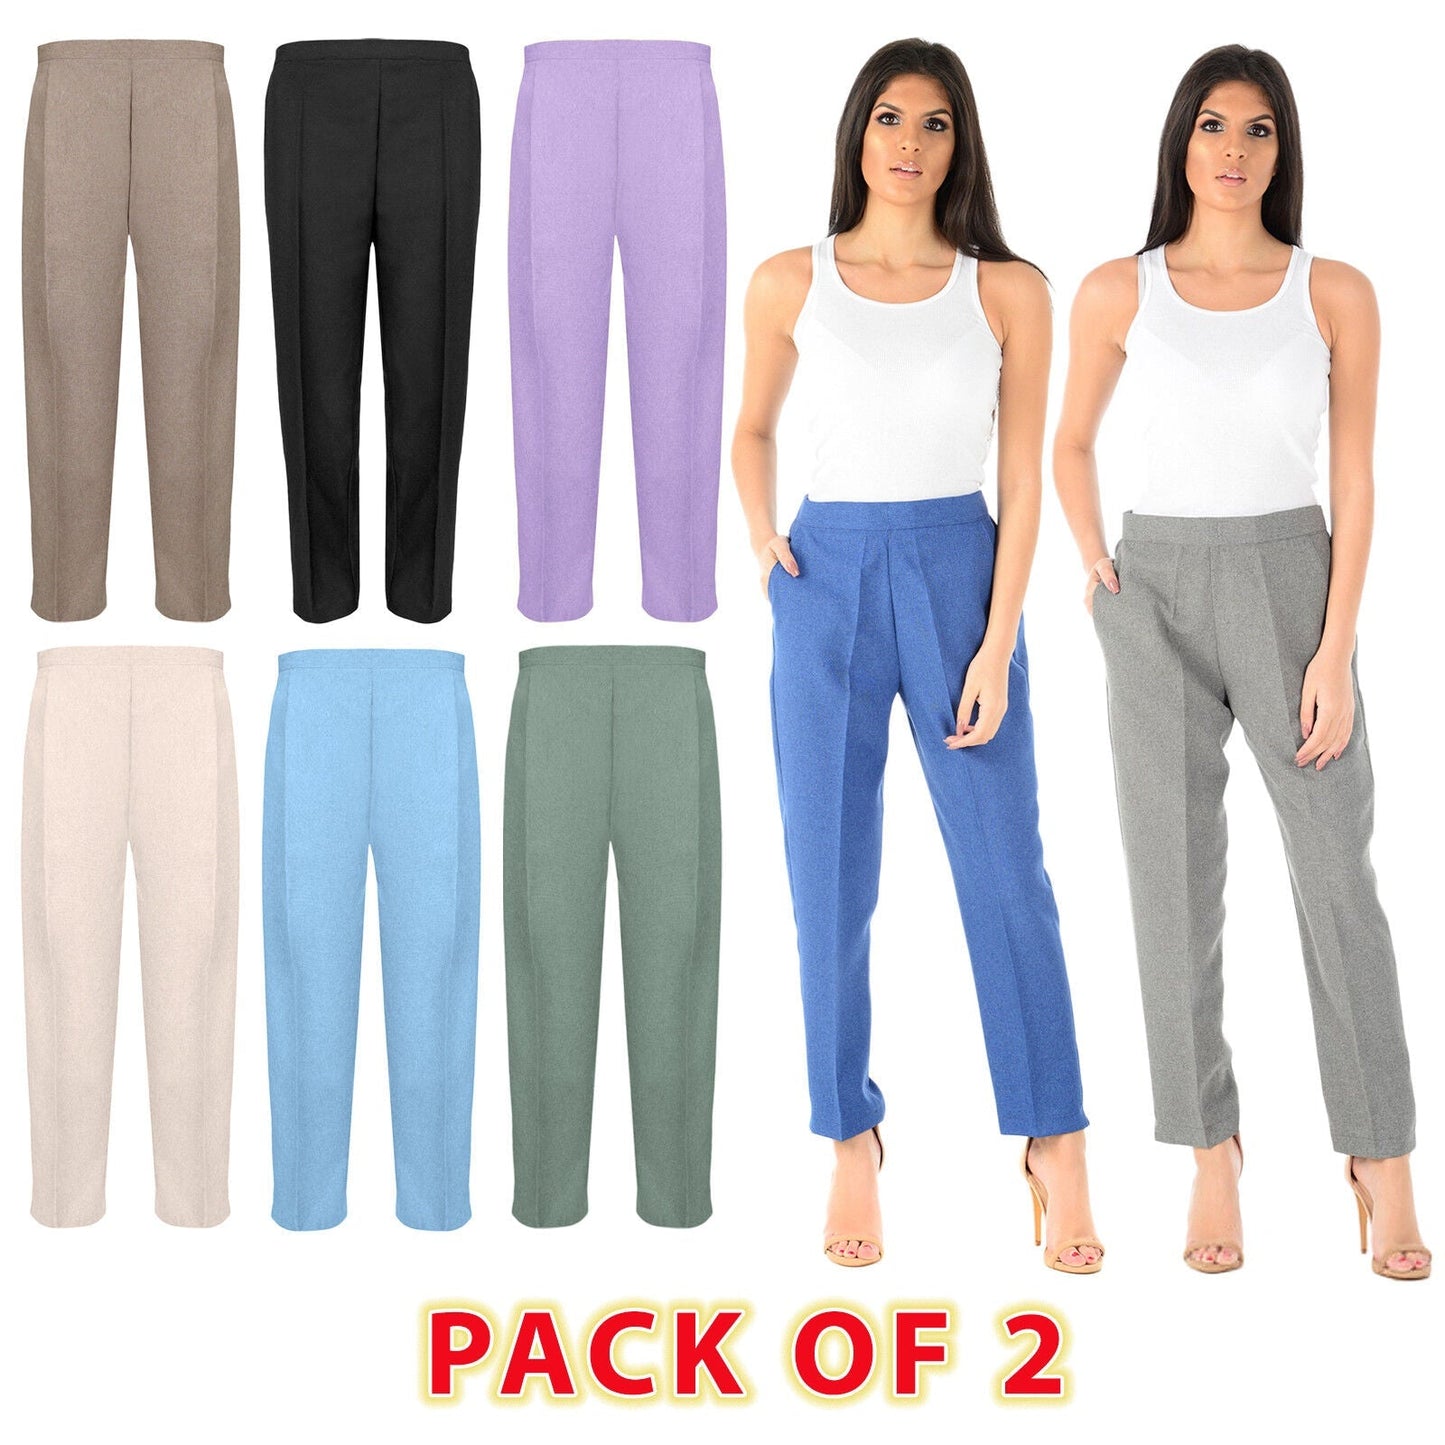 PACK OF 2 LADIES WOMENS HALF ELASTICATED WAIST TROUSERS WITH POCKETS PLUS SIZE 22 to 24